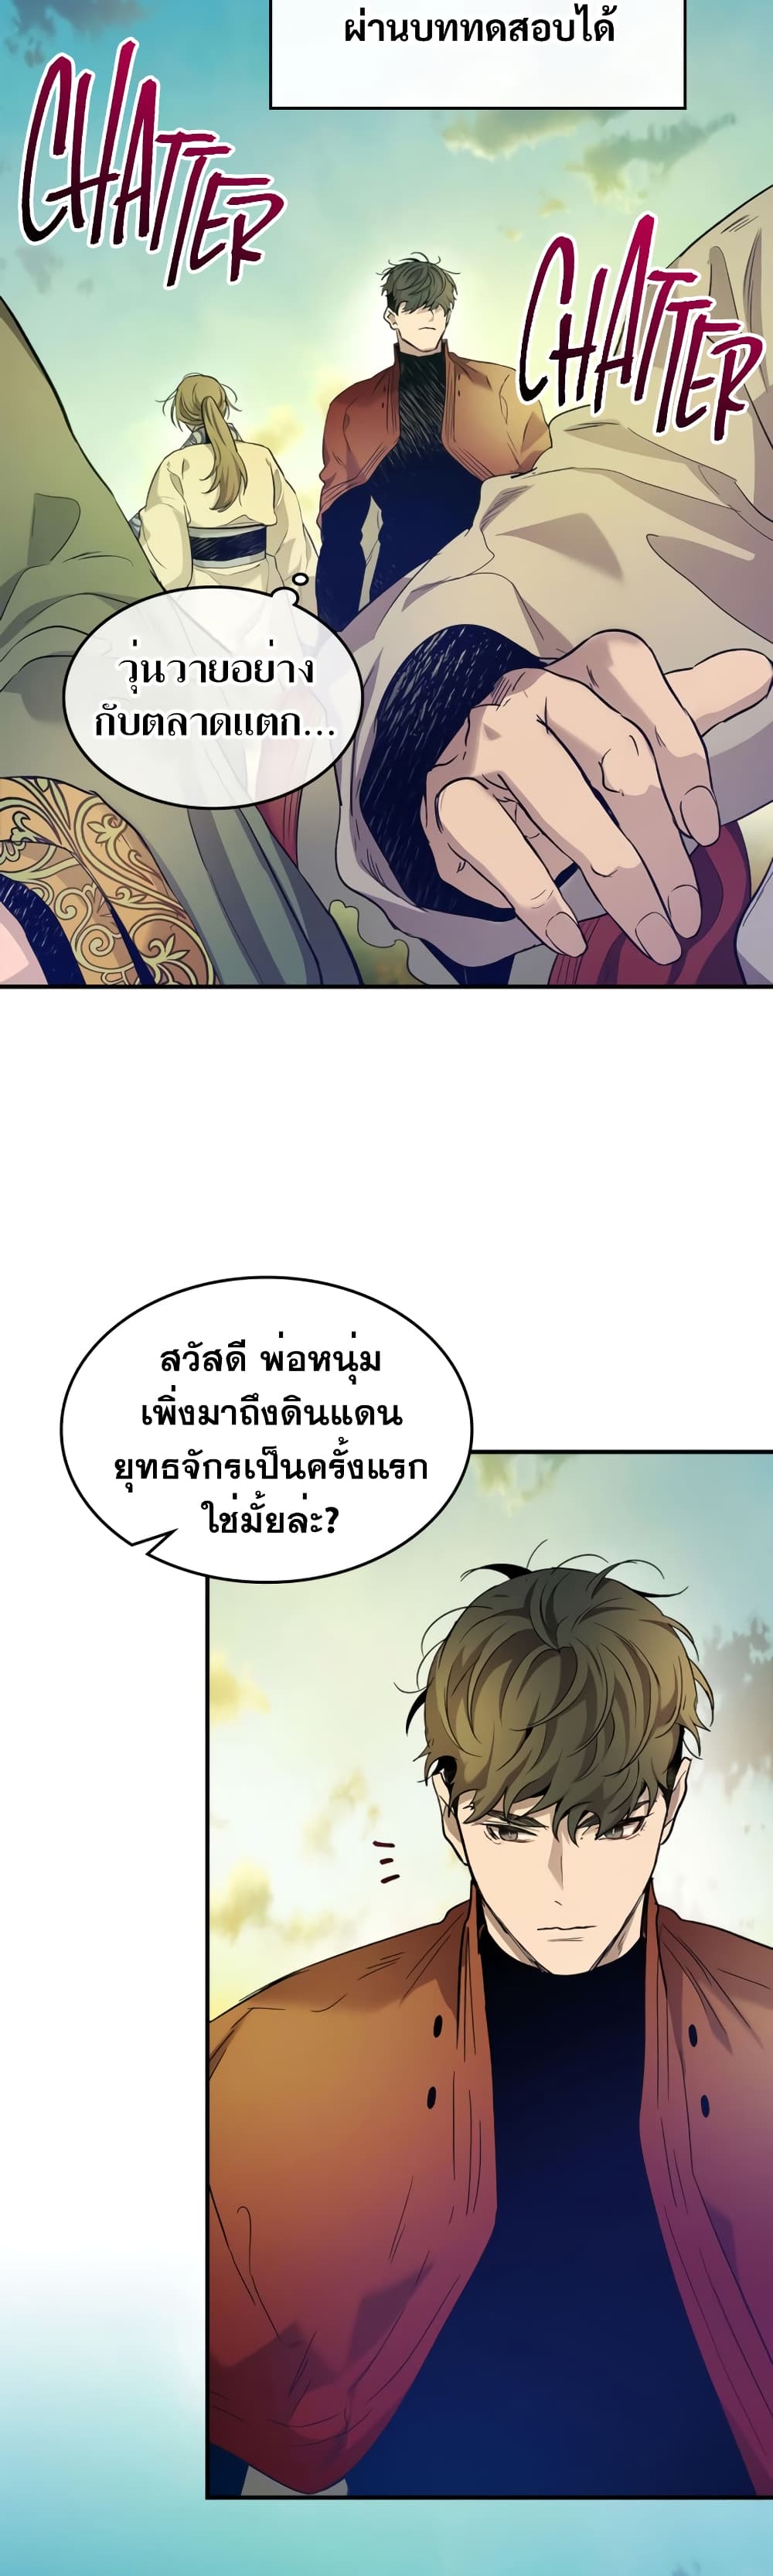 Leveling With The Gods 35 แปลไทย